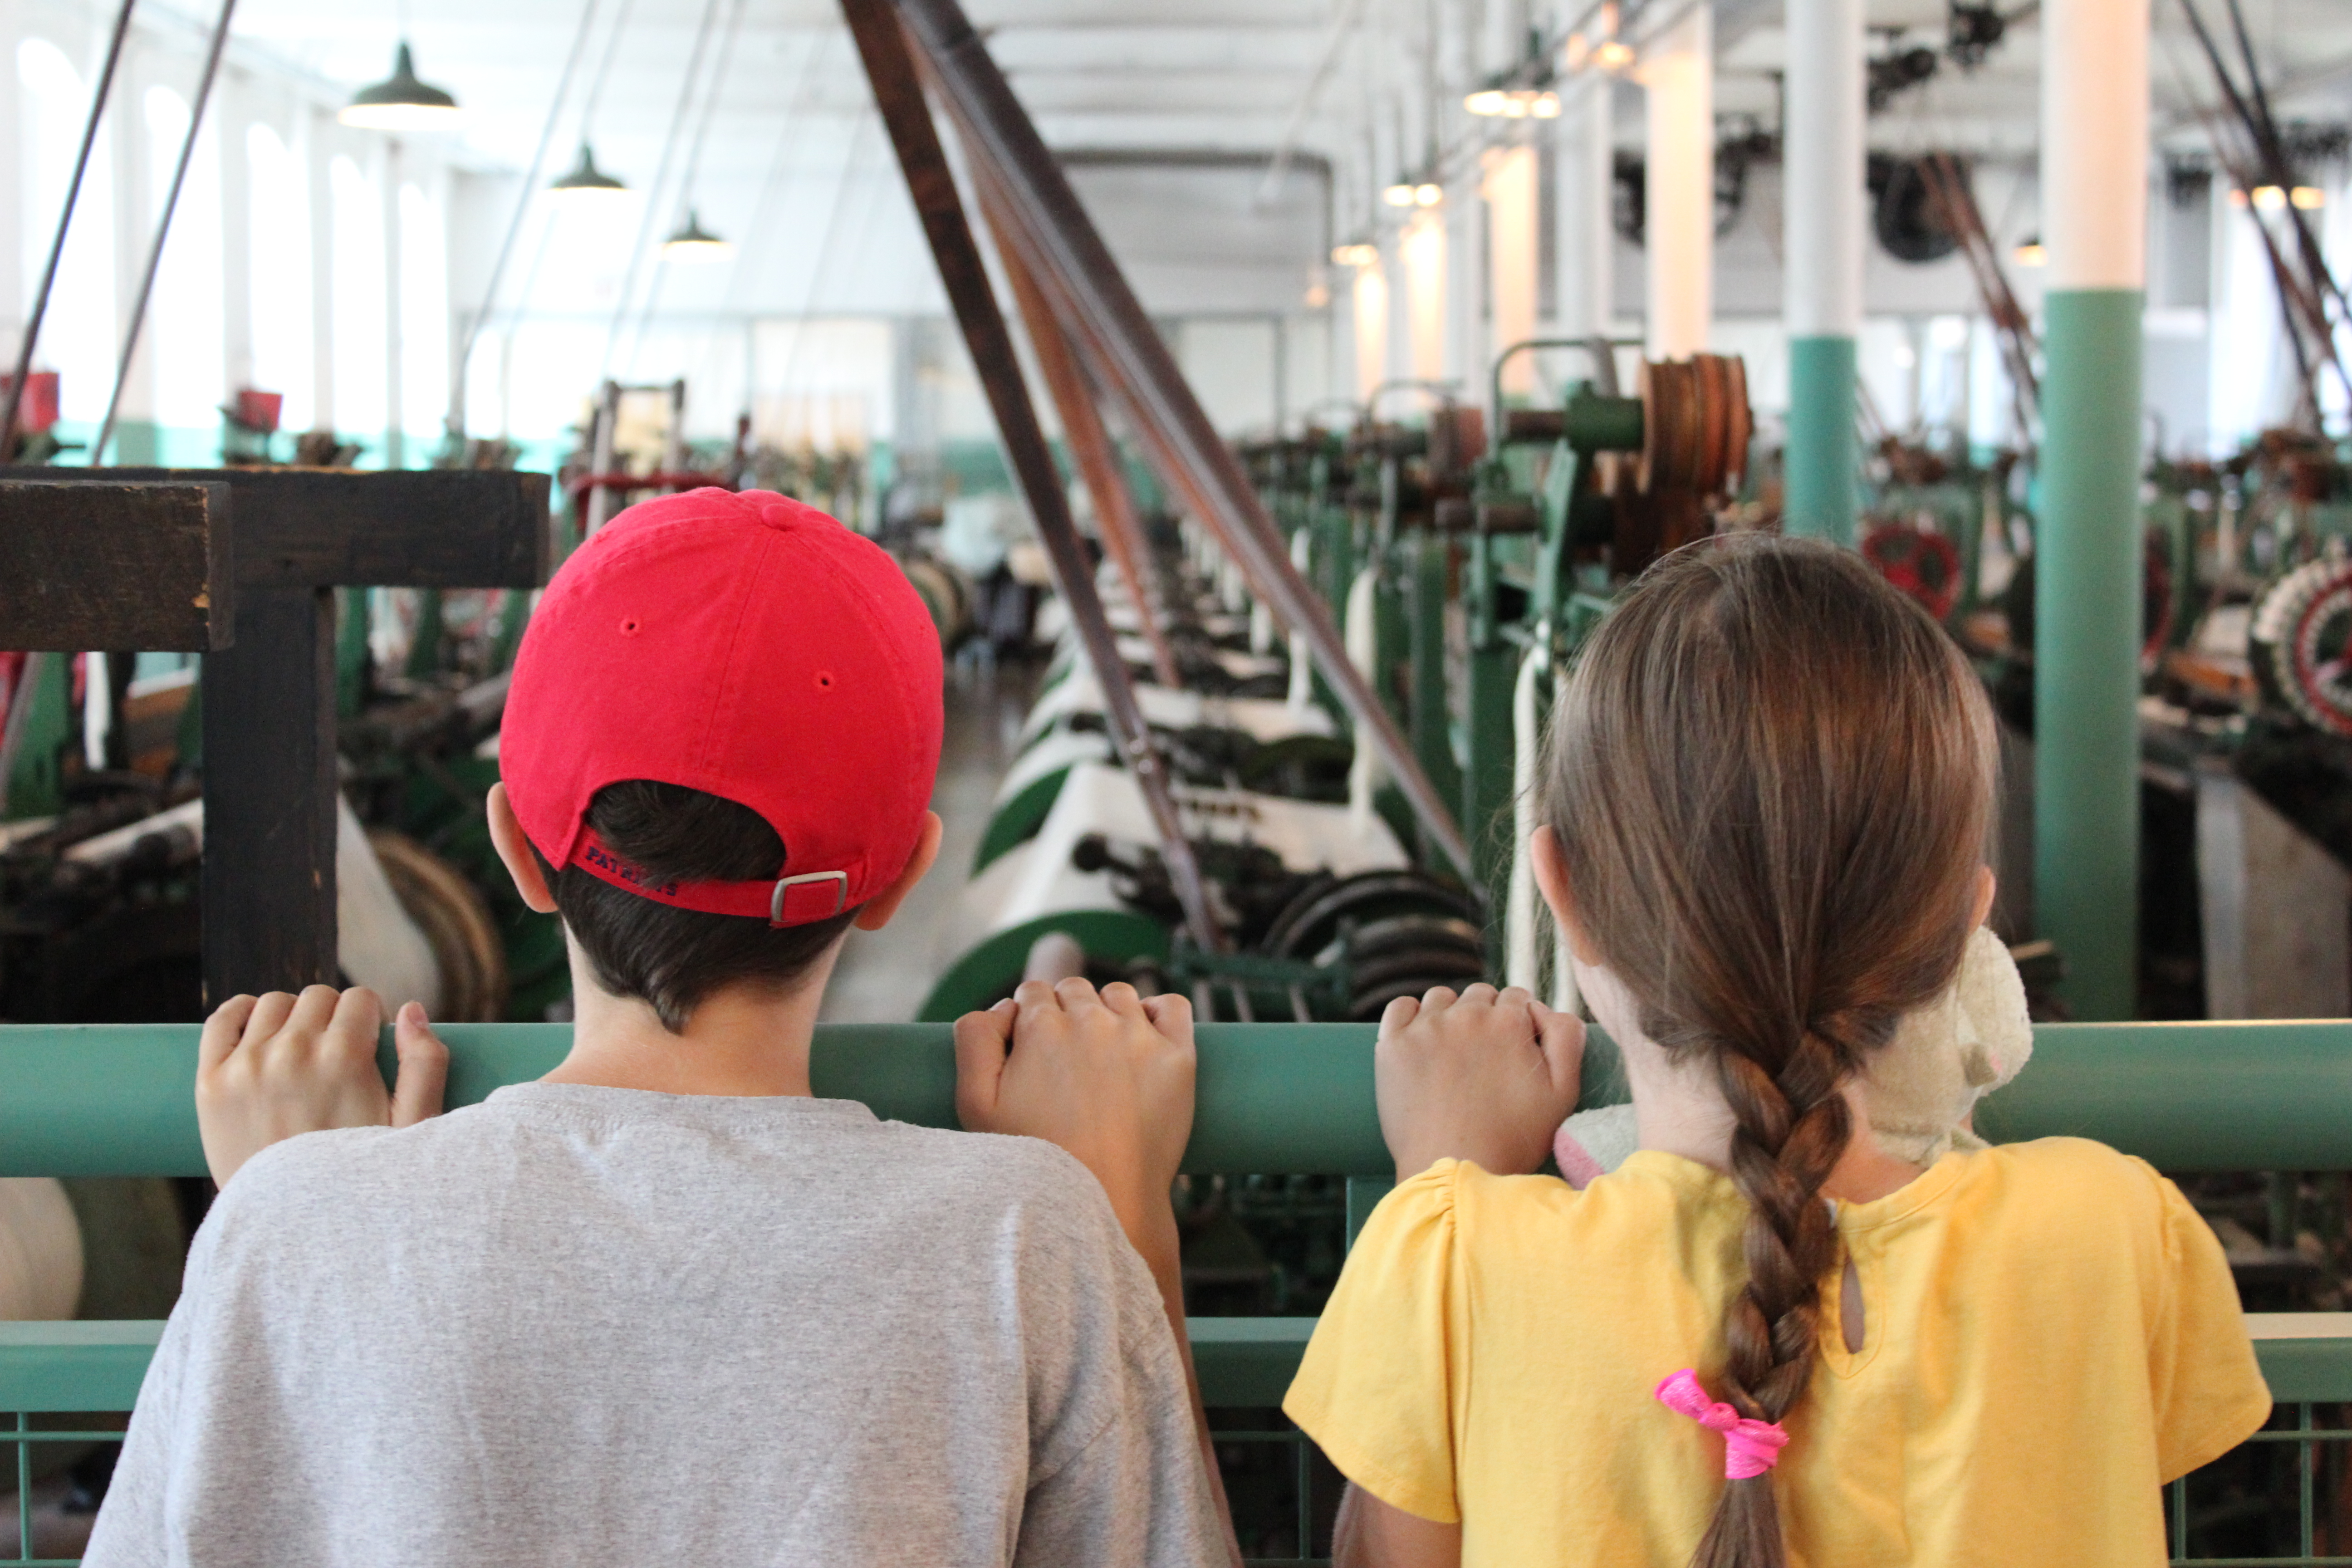 Two young visitors look over the rail at a room full of working looms